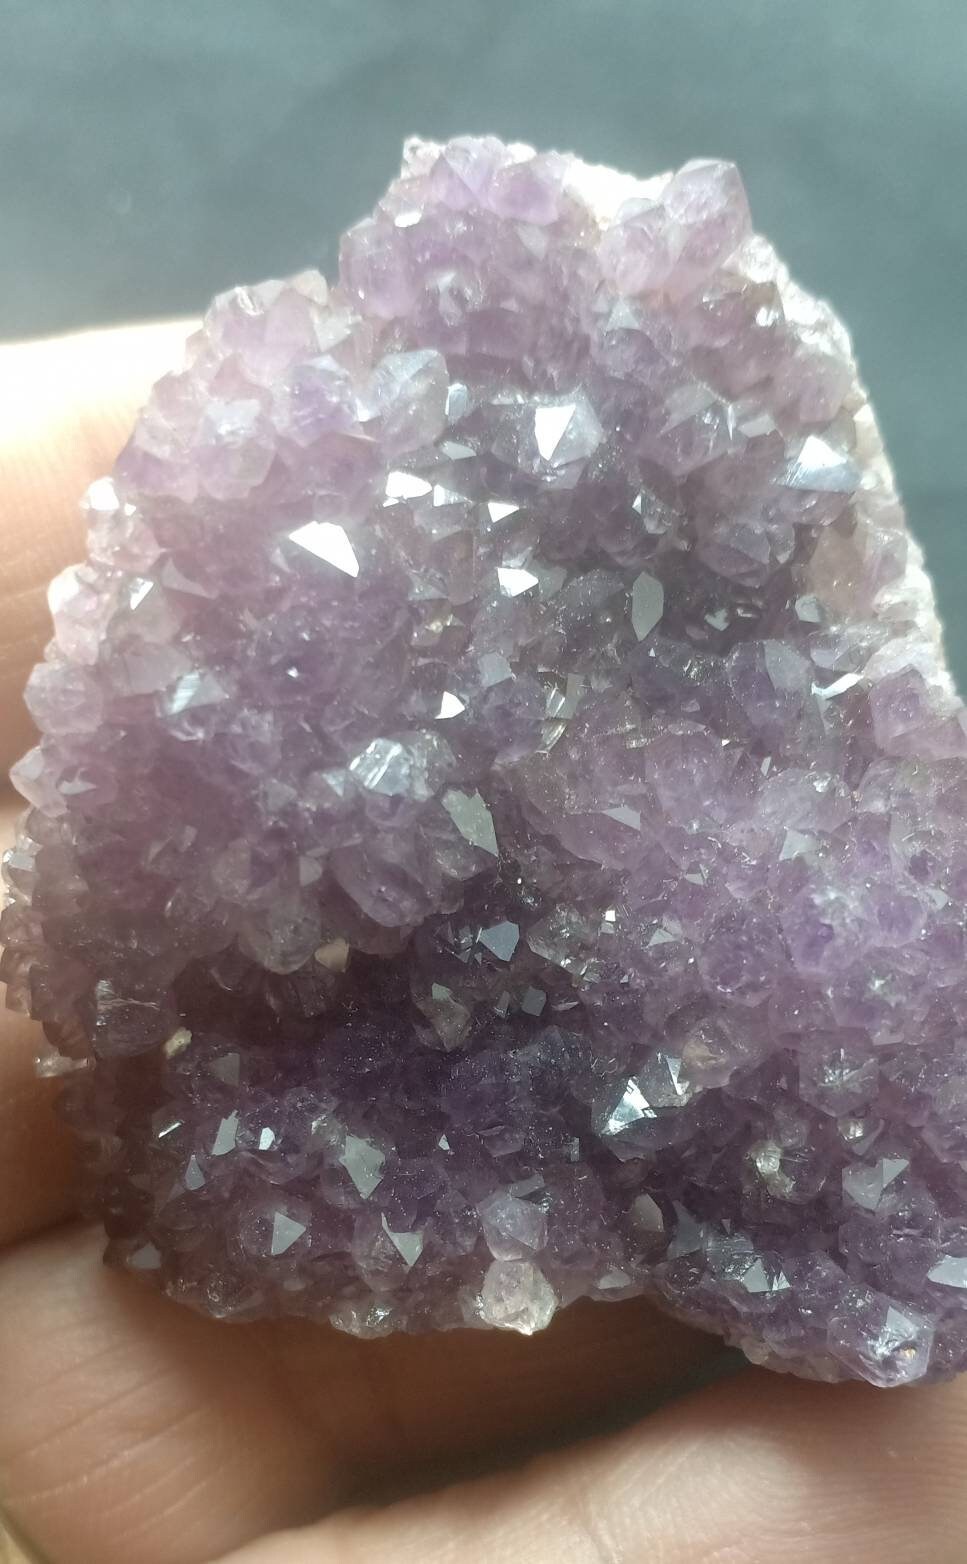 Single beautiful Drusy Amethyst crystals Cluster small plate